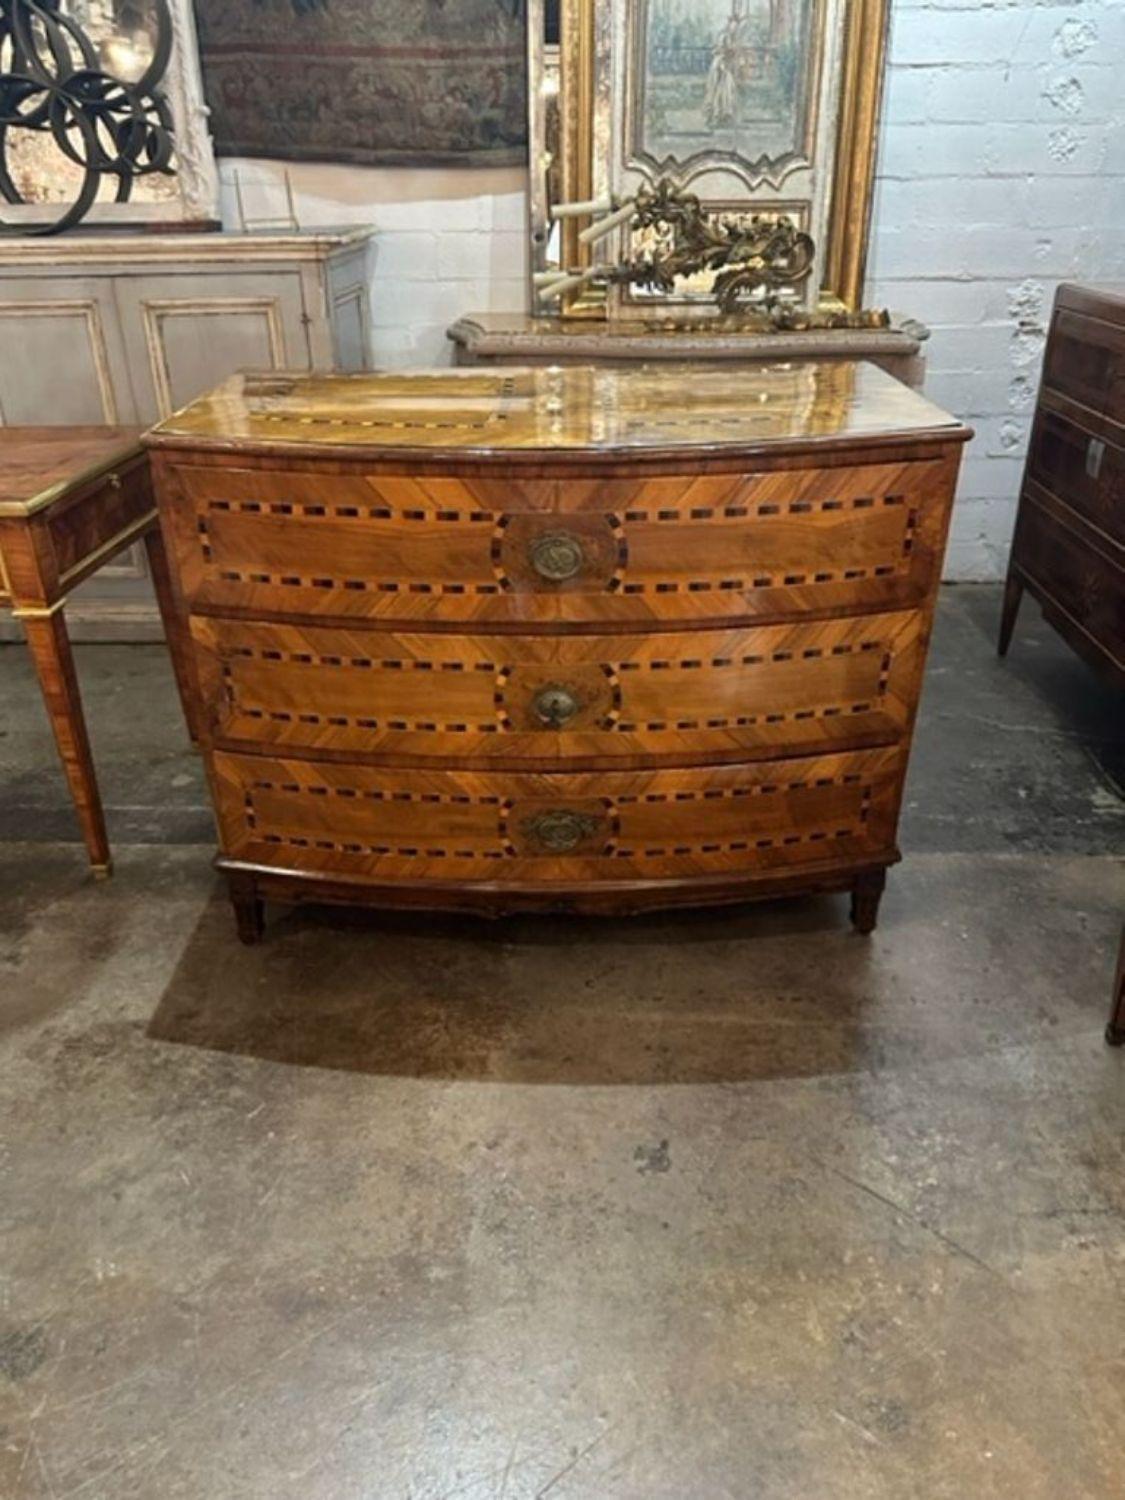 Exceptional 18th century German Biedermeier walnut bow front commode. Very fine finish and beautiful inlaid pattern. Superb!!